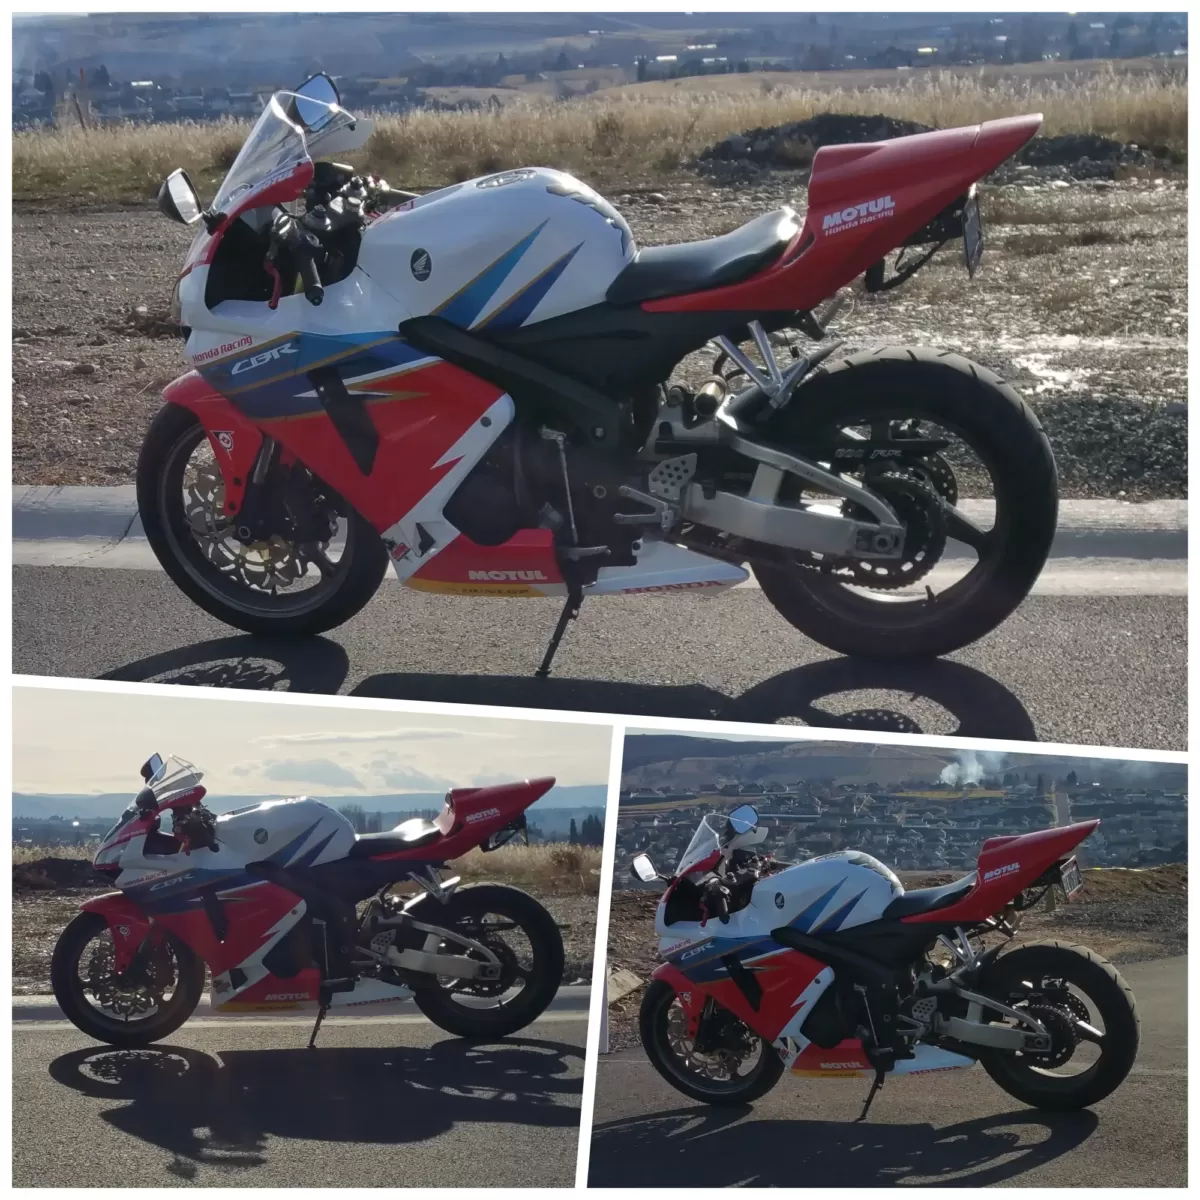 Rider-Review-Anthony-CBR600RR-Fairing